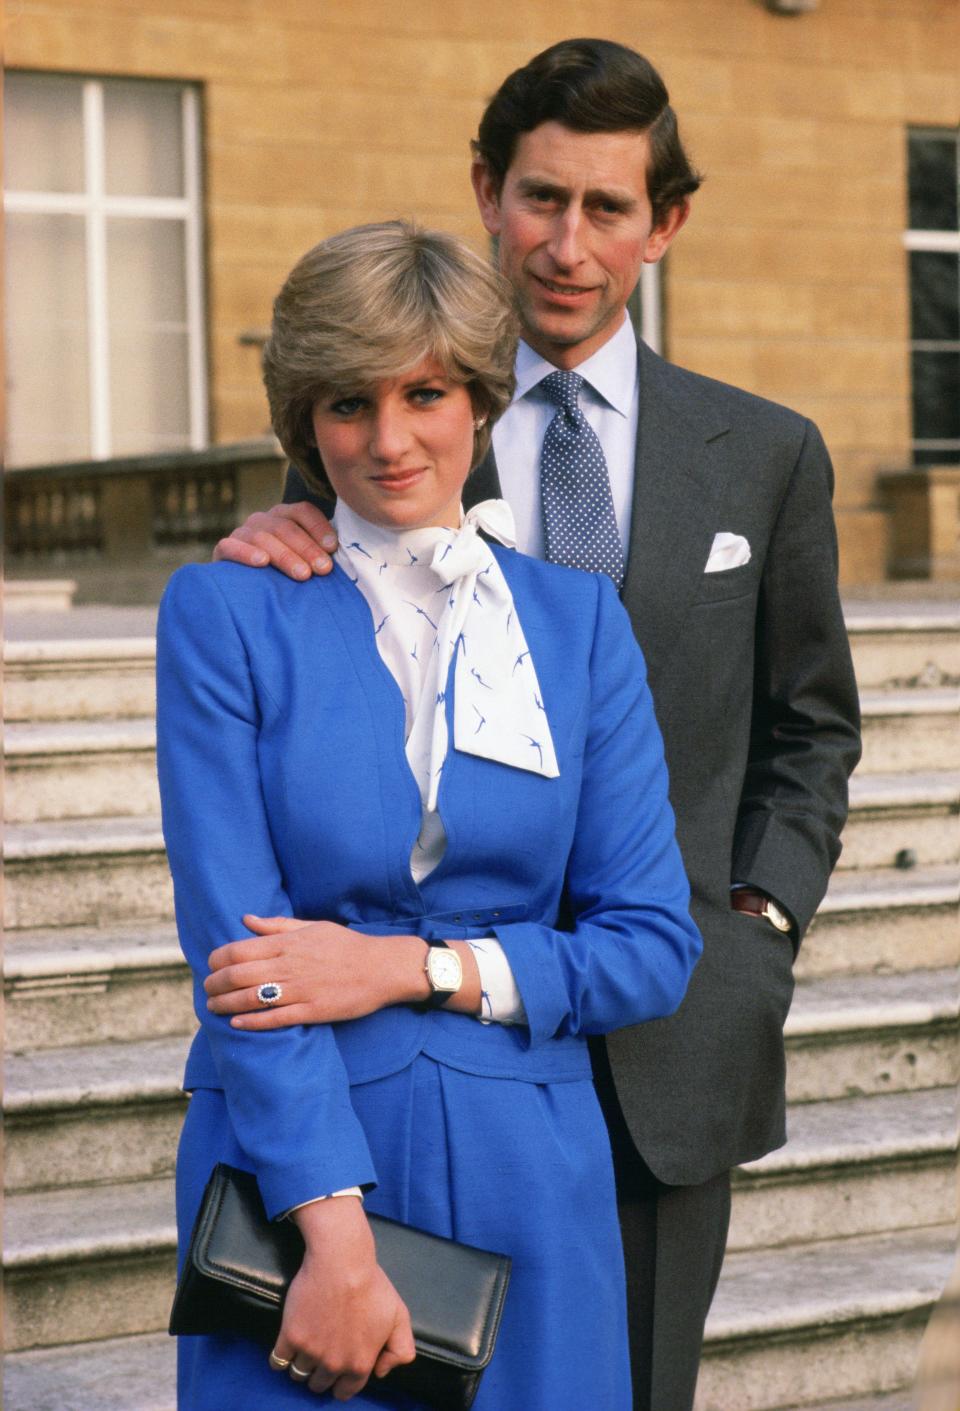 February 6, 1981: After going on just a handful of dates, Prince Charles announces his engagement to 19-year-old Lady Diana Spencer. He proposes with the same ring Kate Middleton now wears.